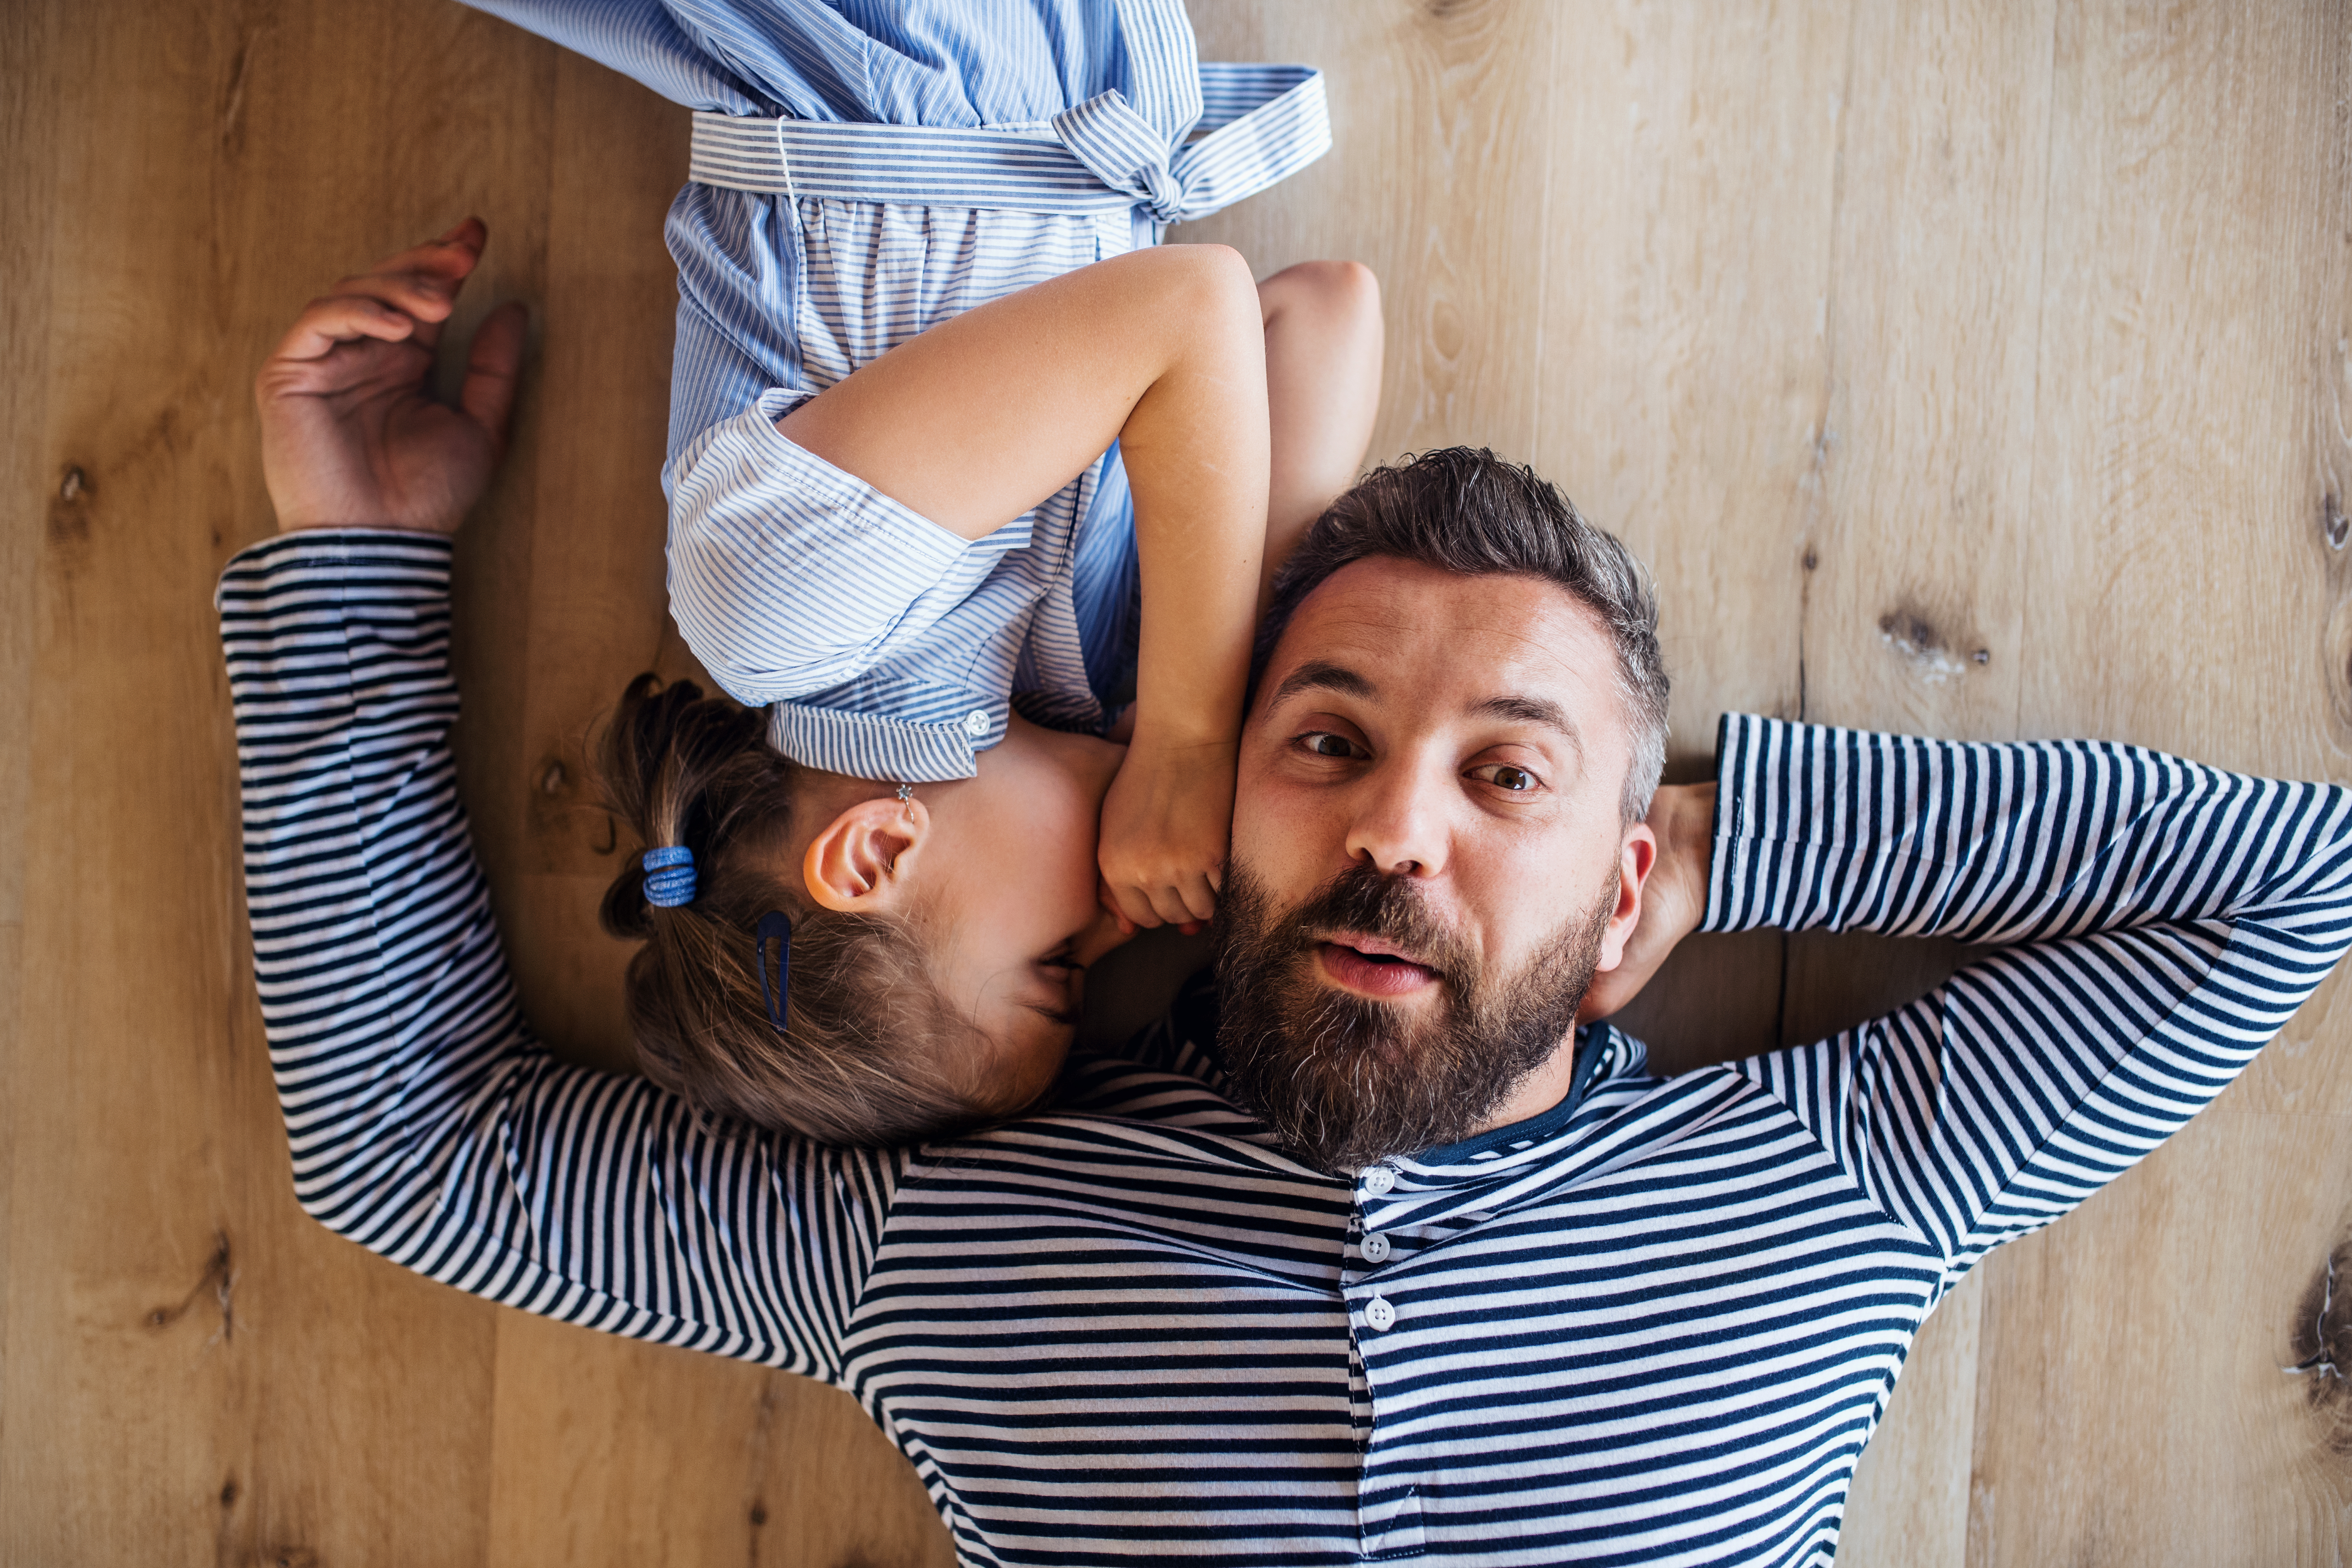 Top view of mature father and small daughter lying on floor indoors at home, whispering | Source: Getty Images